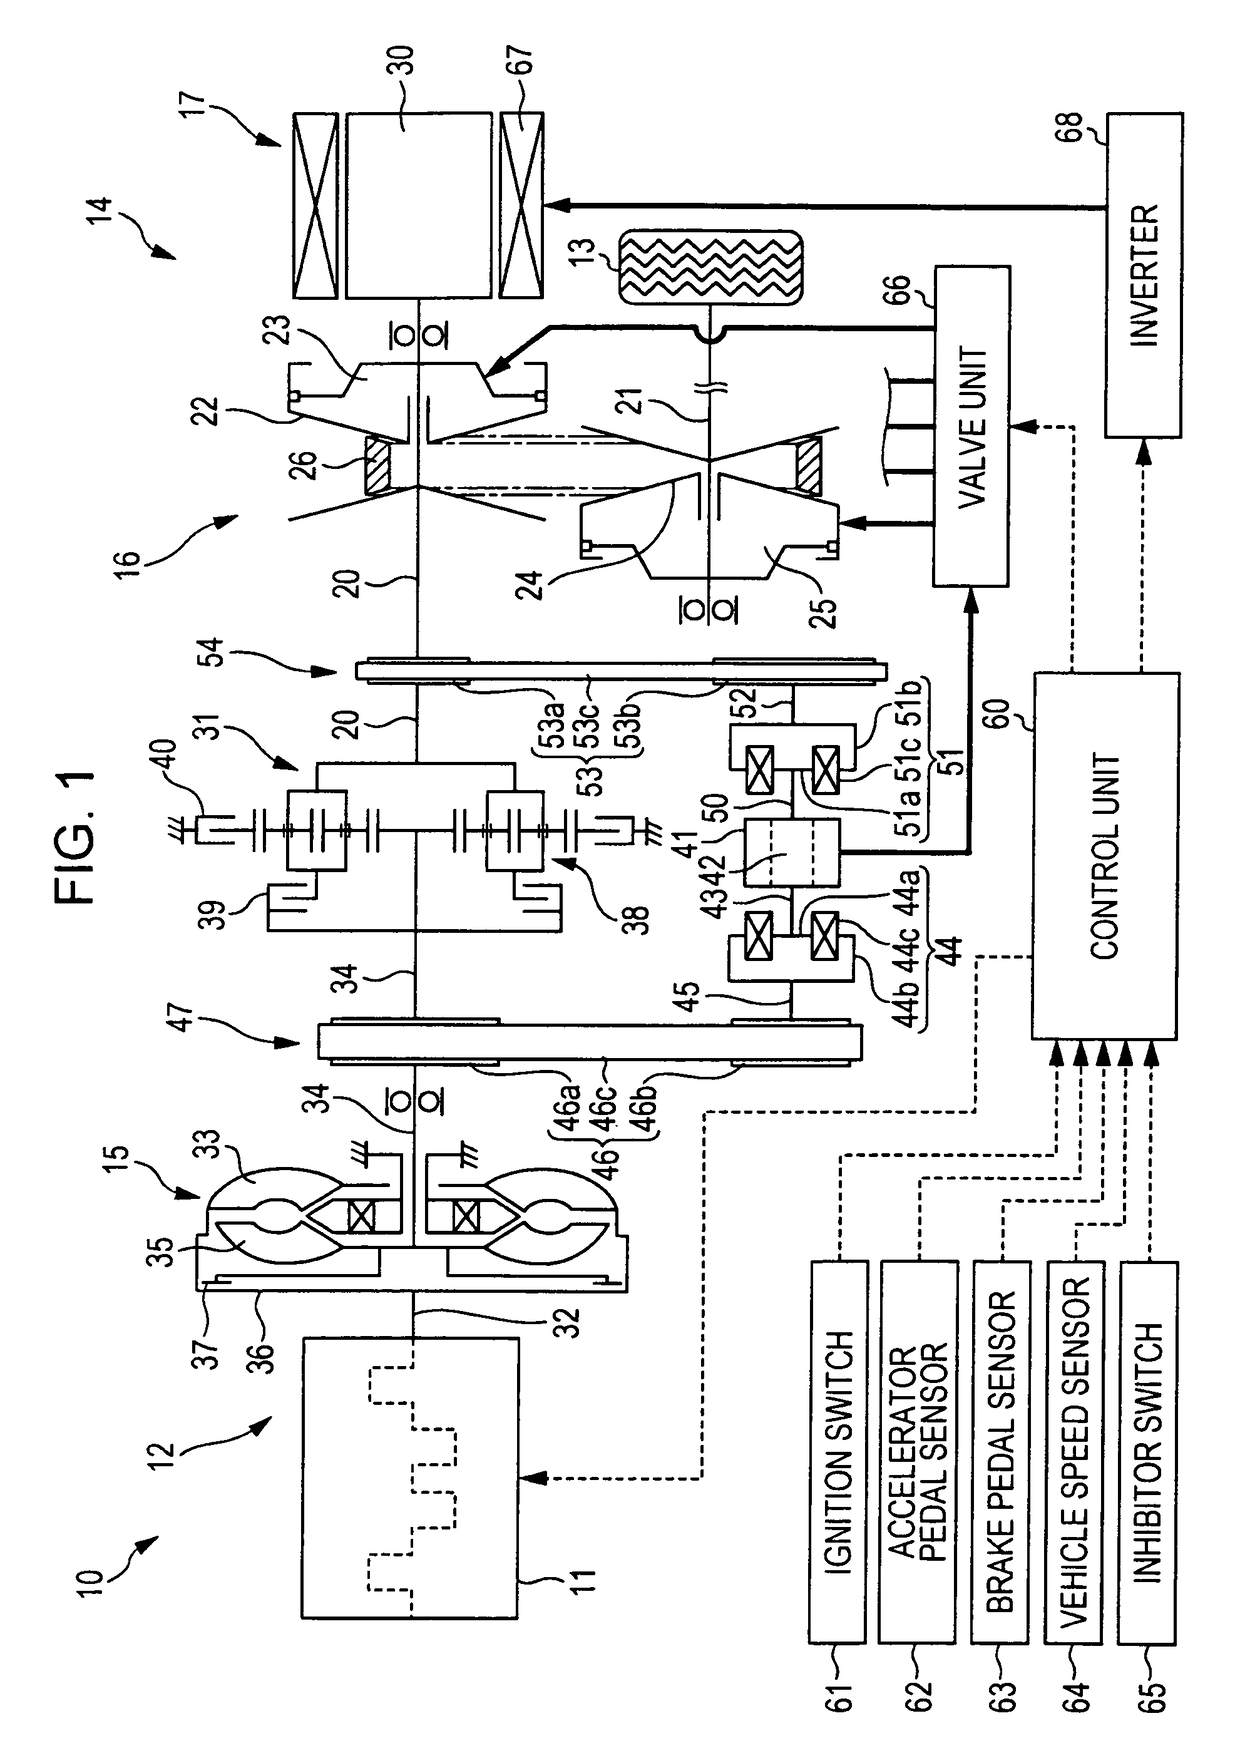 Drive apparatus for a vehicle